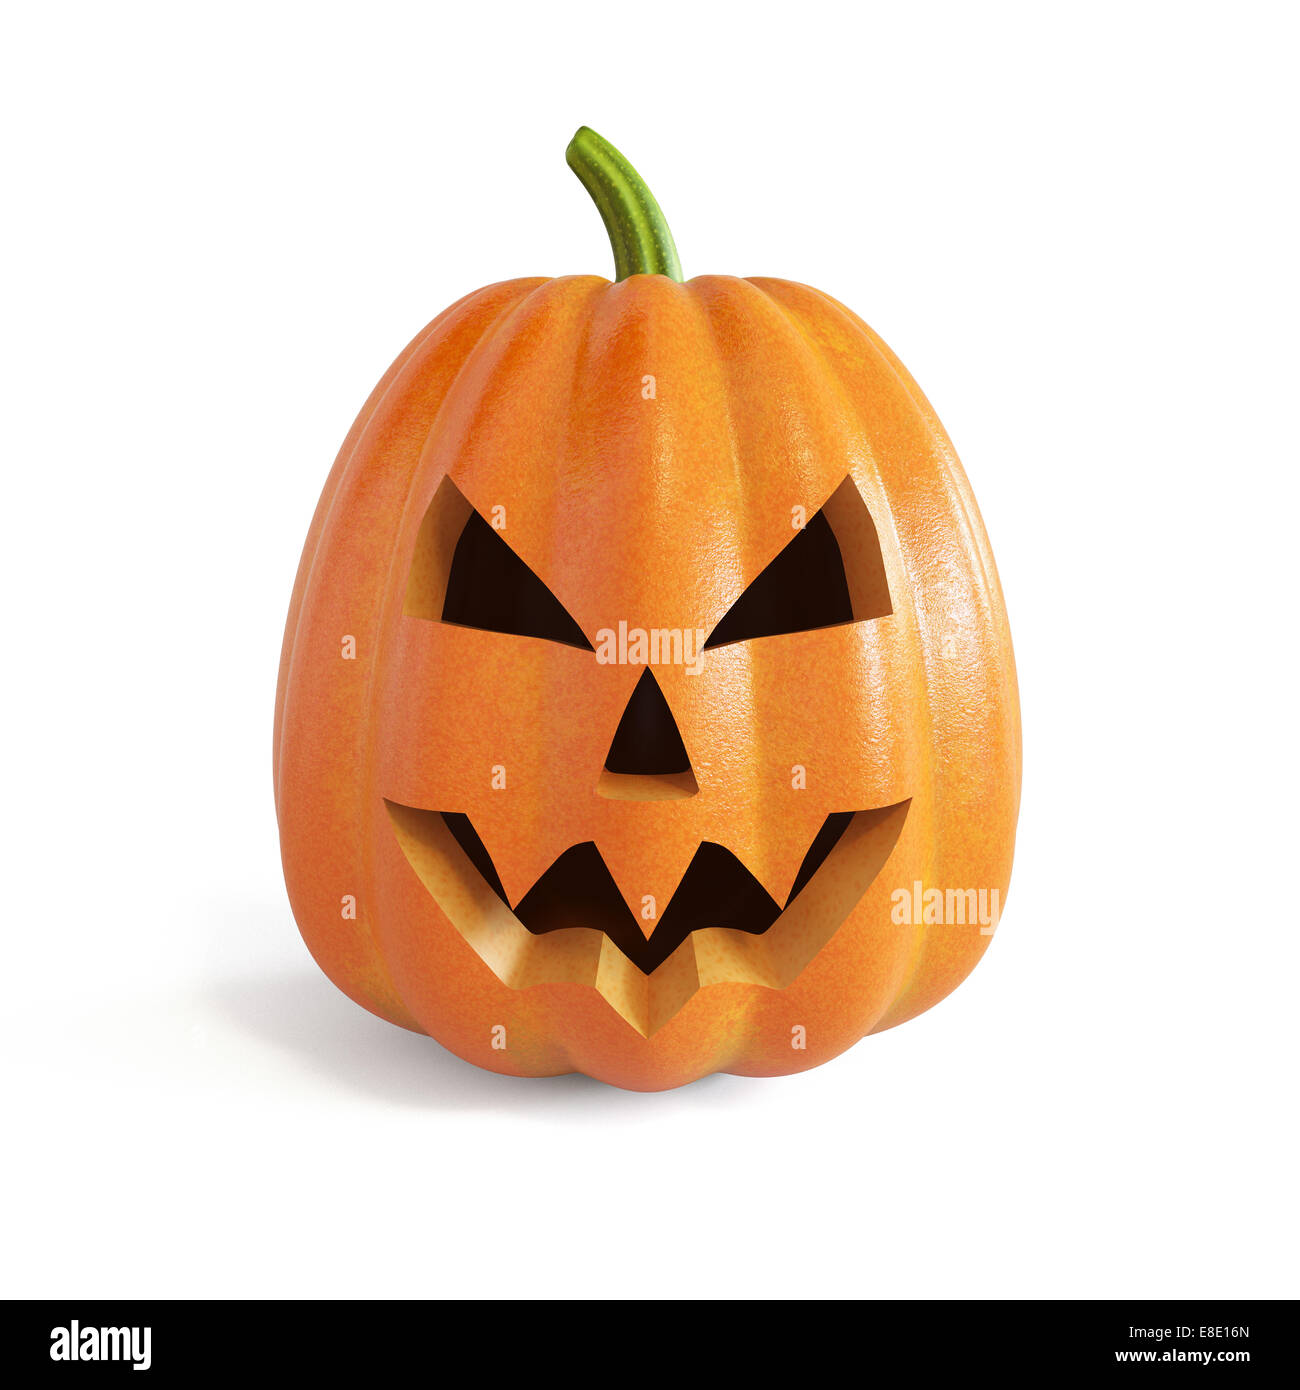 3d render of the Jack O Lantern halloween pumpkin. Isolated on white background Stock Photo